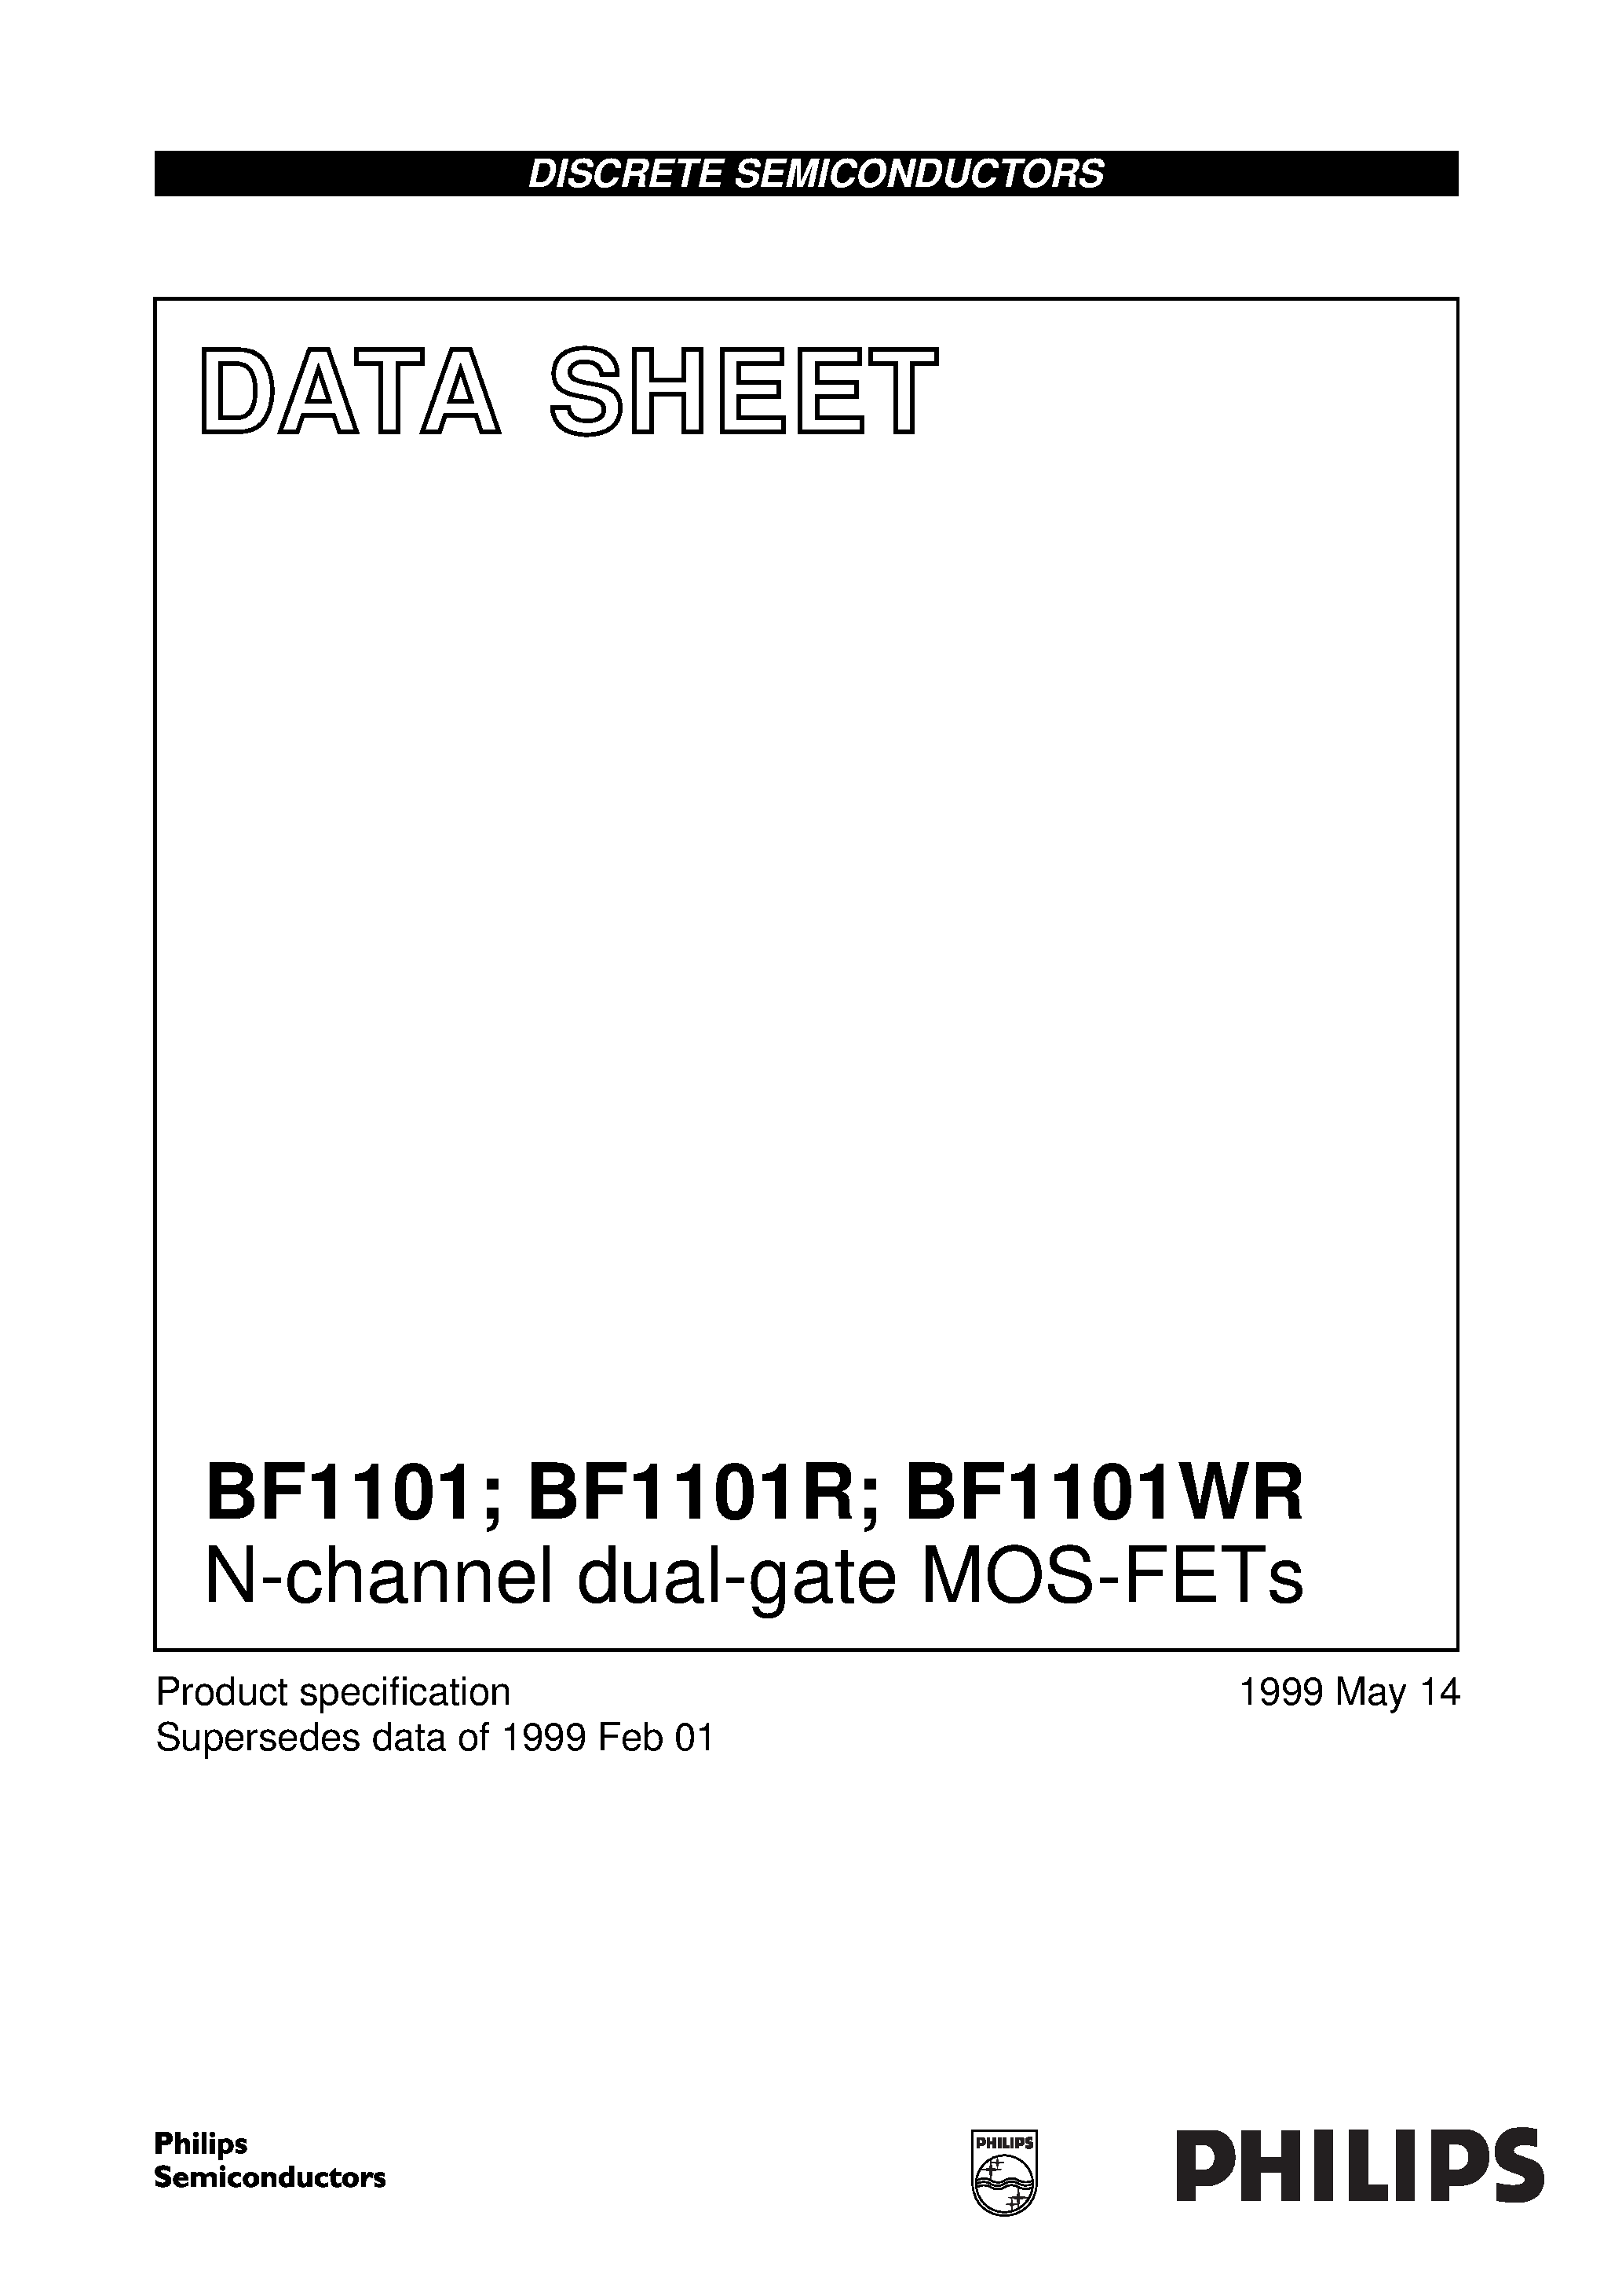 Datasheet BF1101WR - N-channel dual-gate MOS-FETs page 1